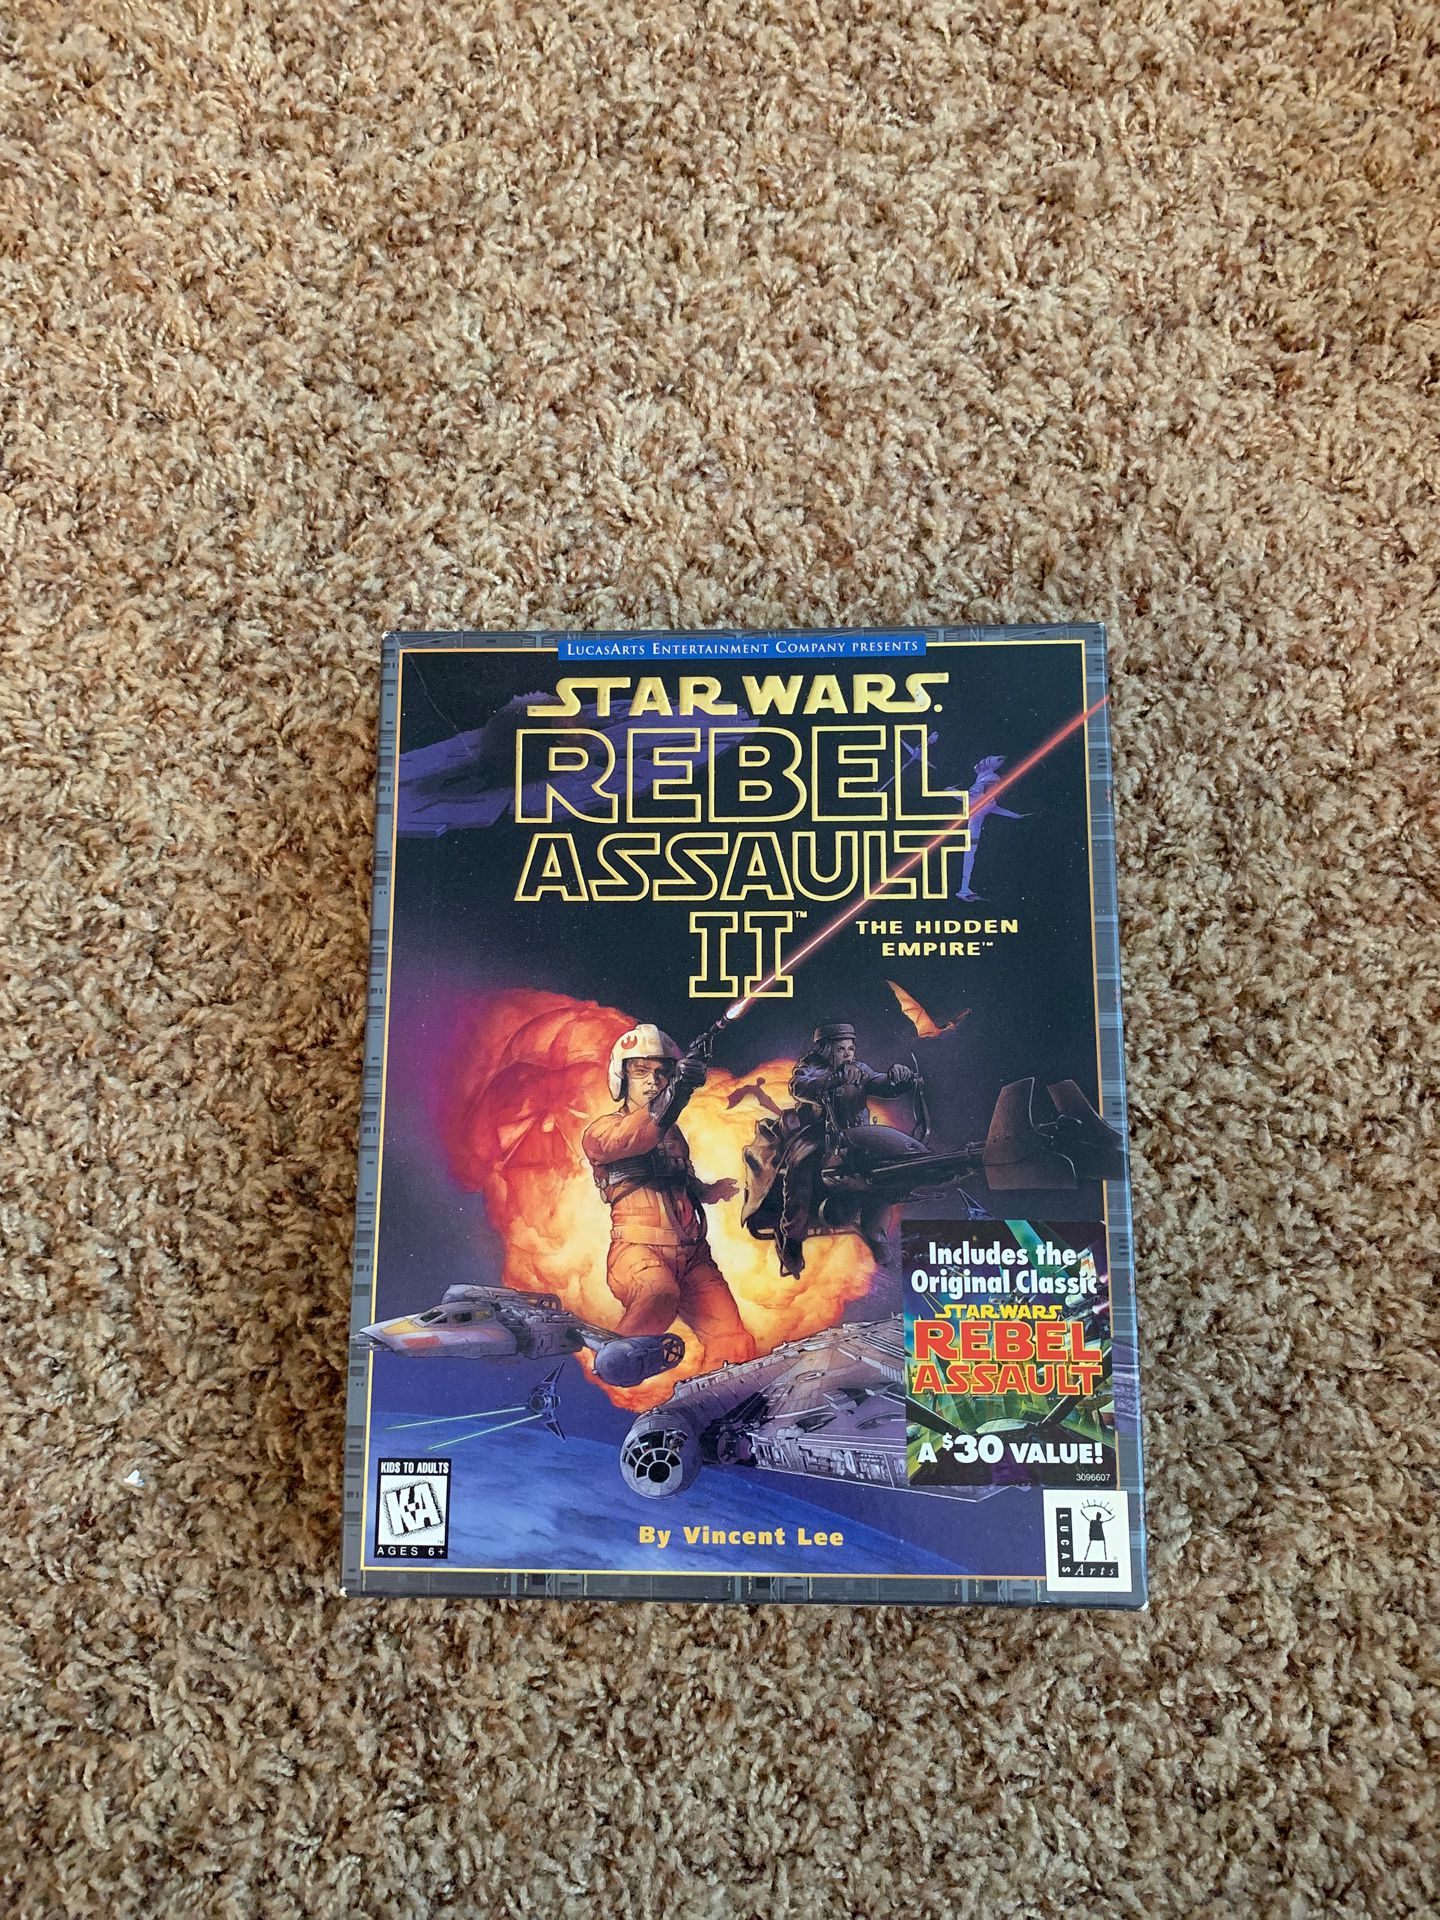 Star Wars - Rebel Assault 2 PC game - great quality